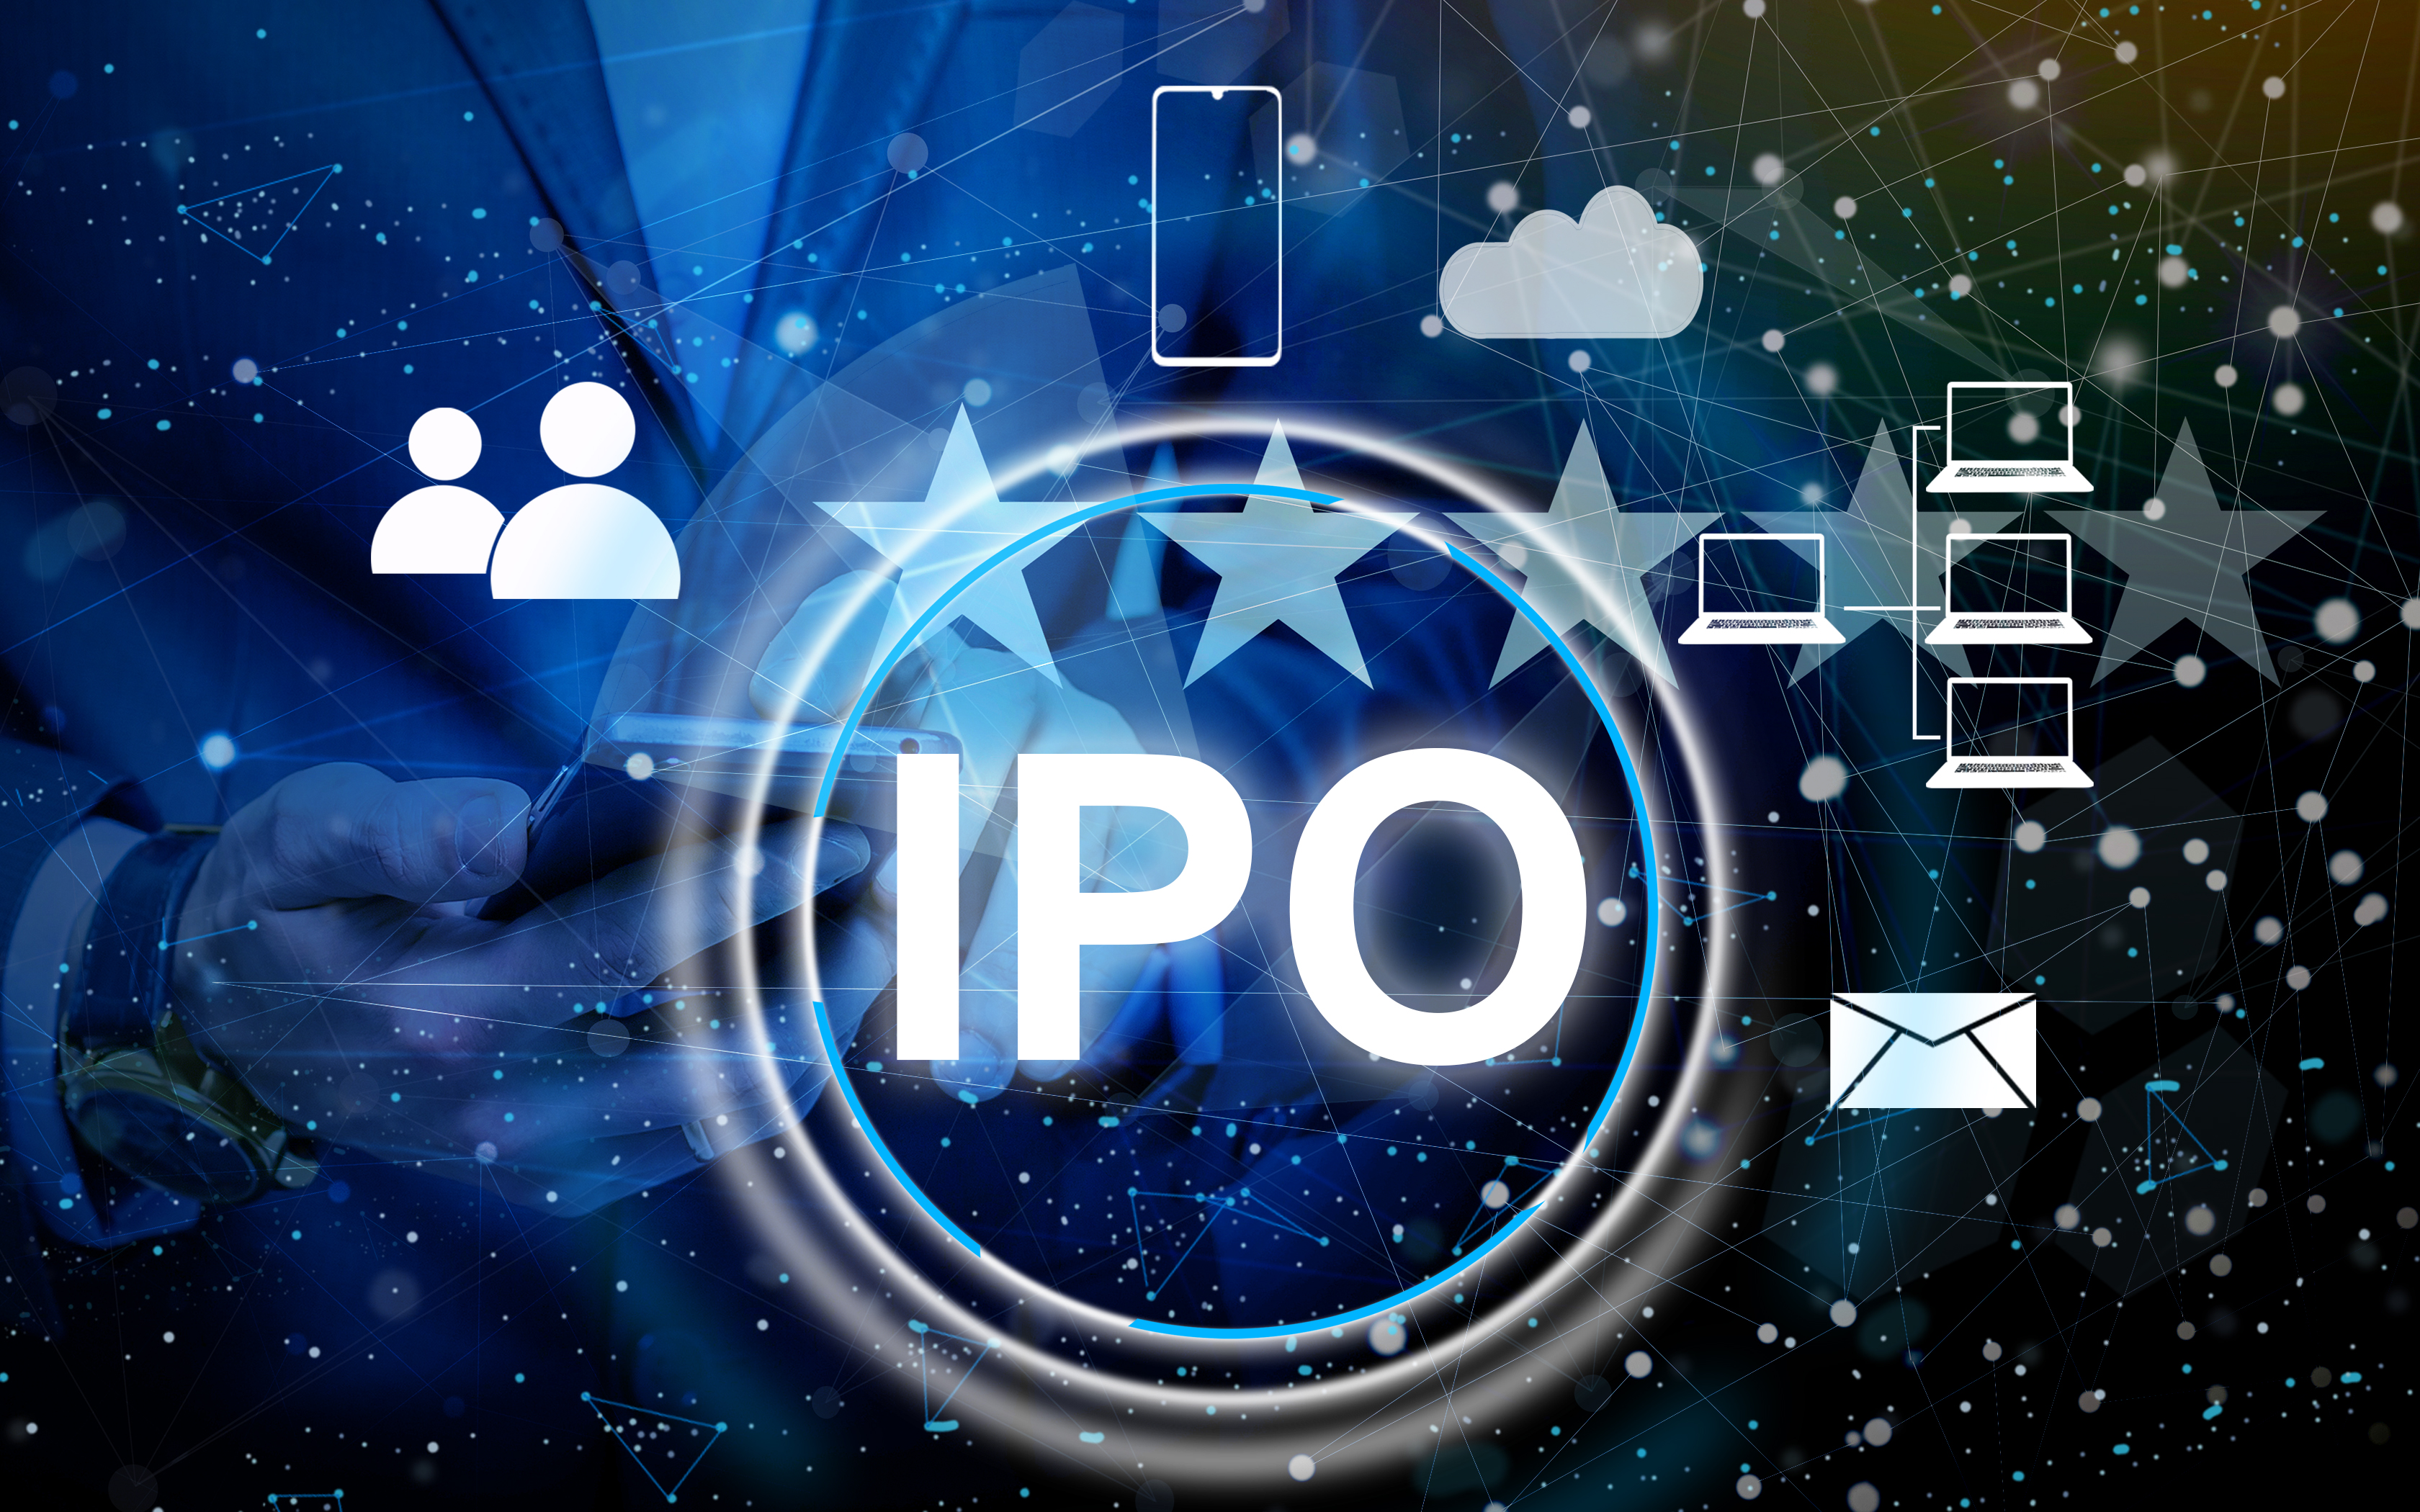 Premier Energies files for IPO with Sebi, aiming to raise Rs 1,500 crore in funds